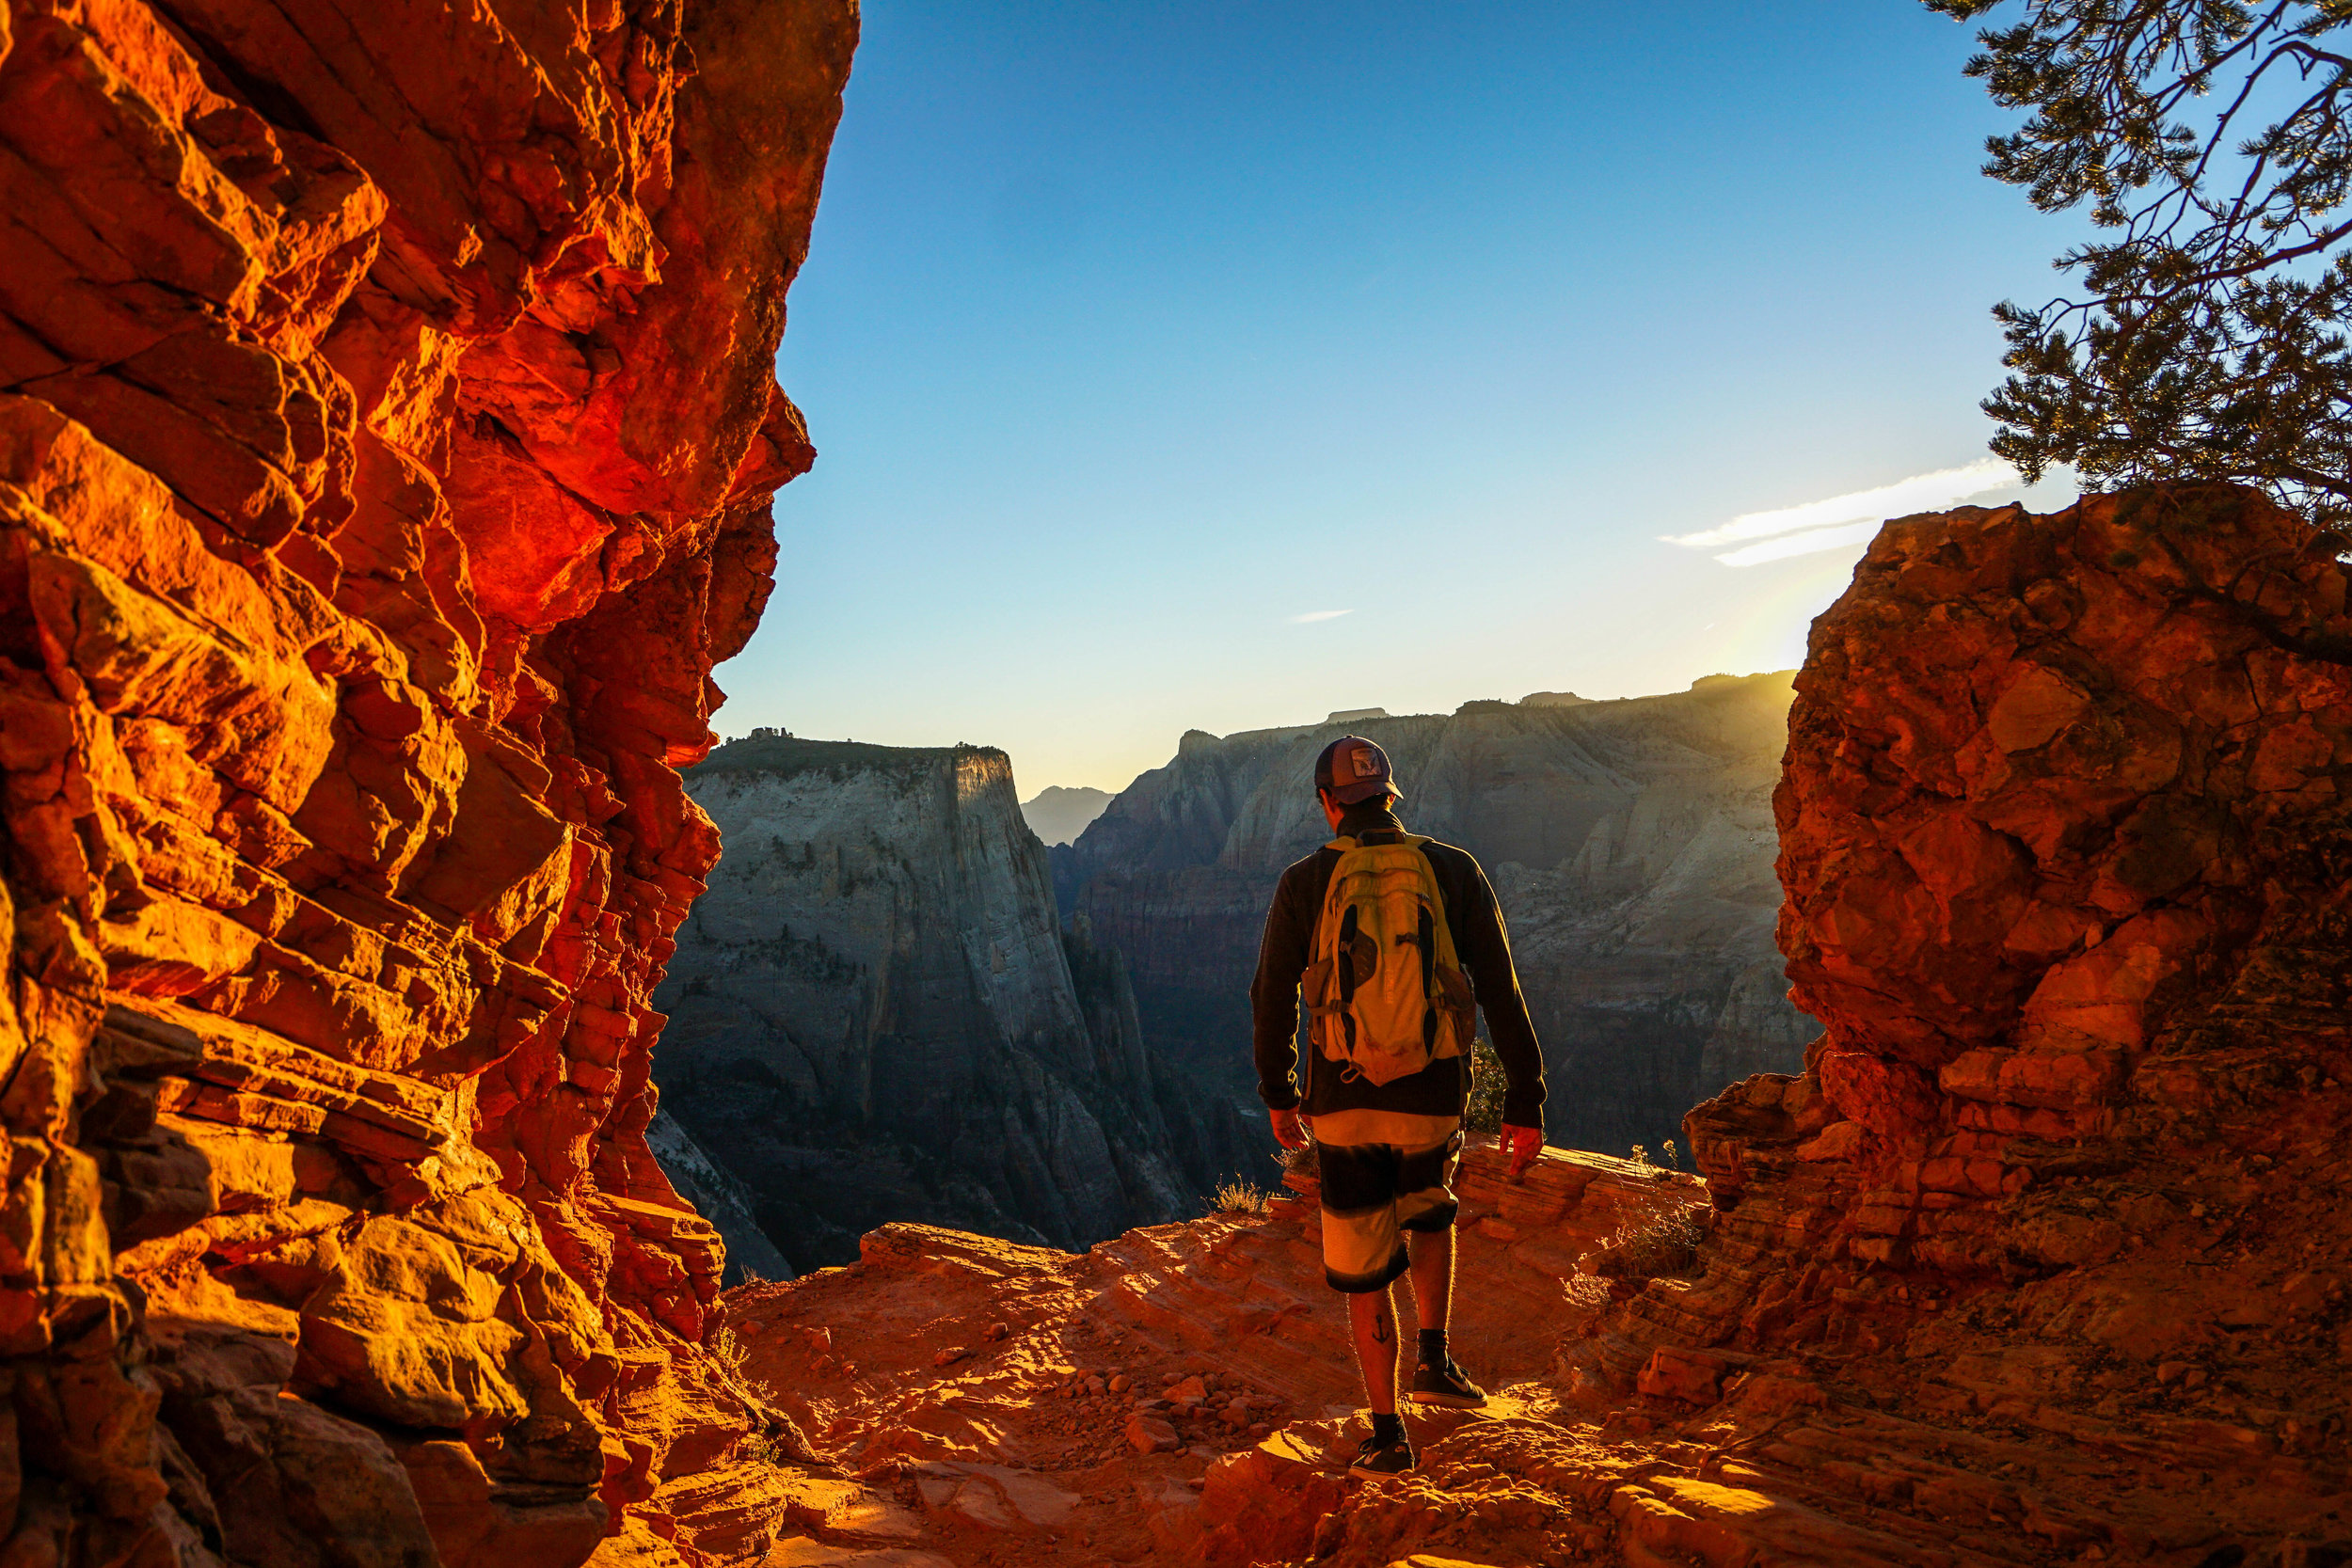 When the sun reaches just the right angle, the canyon walls radiate an immaculate glow.